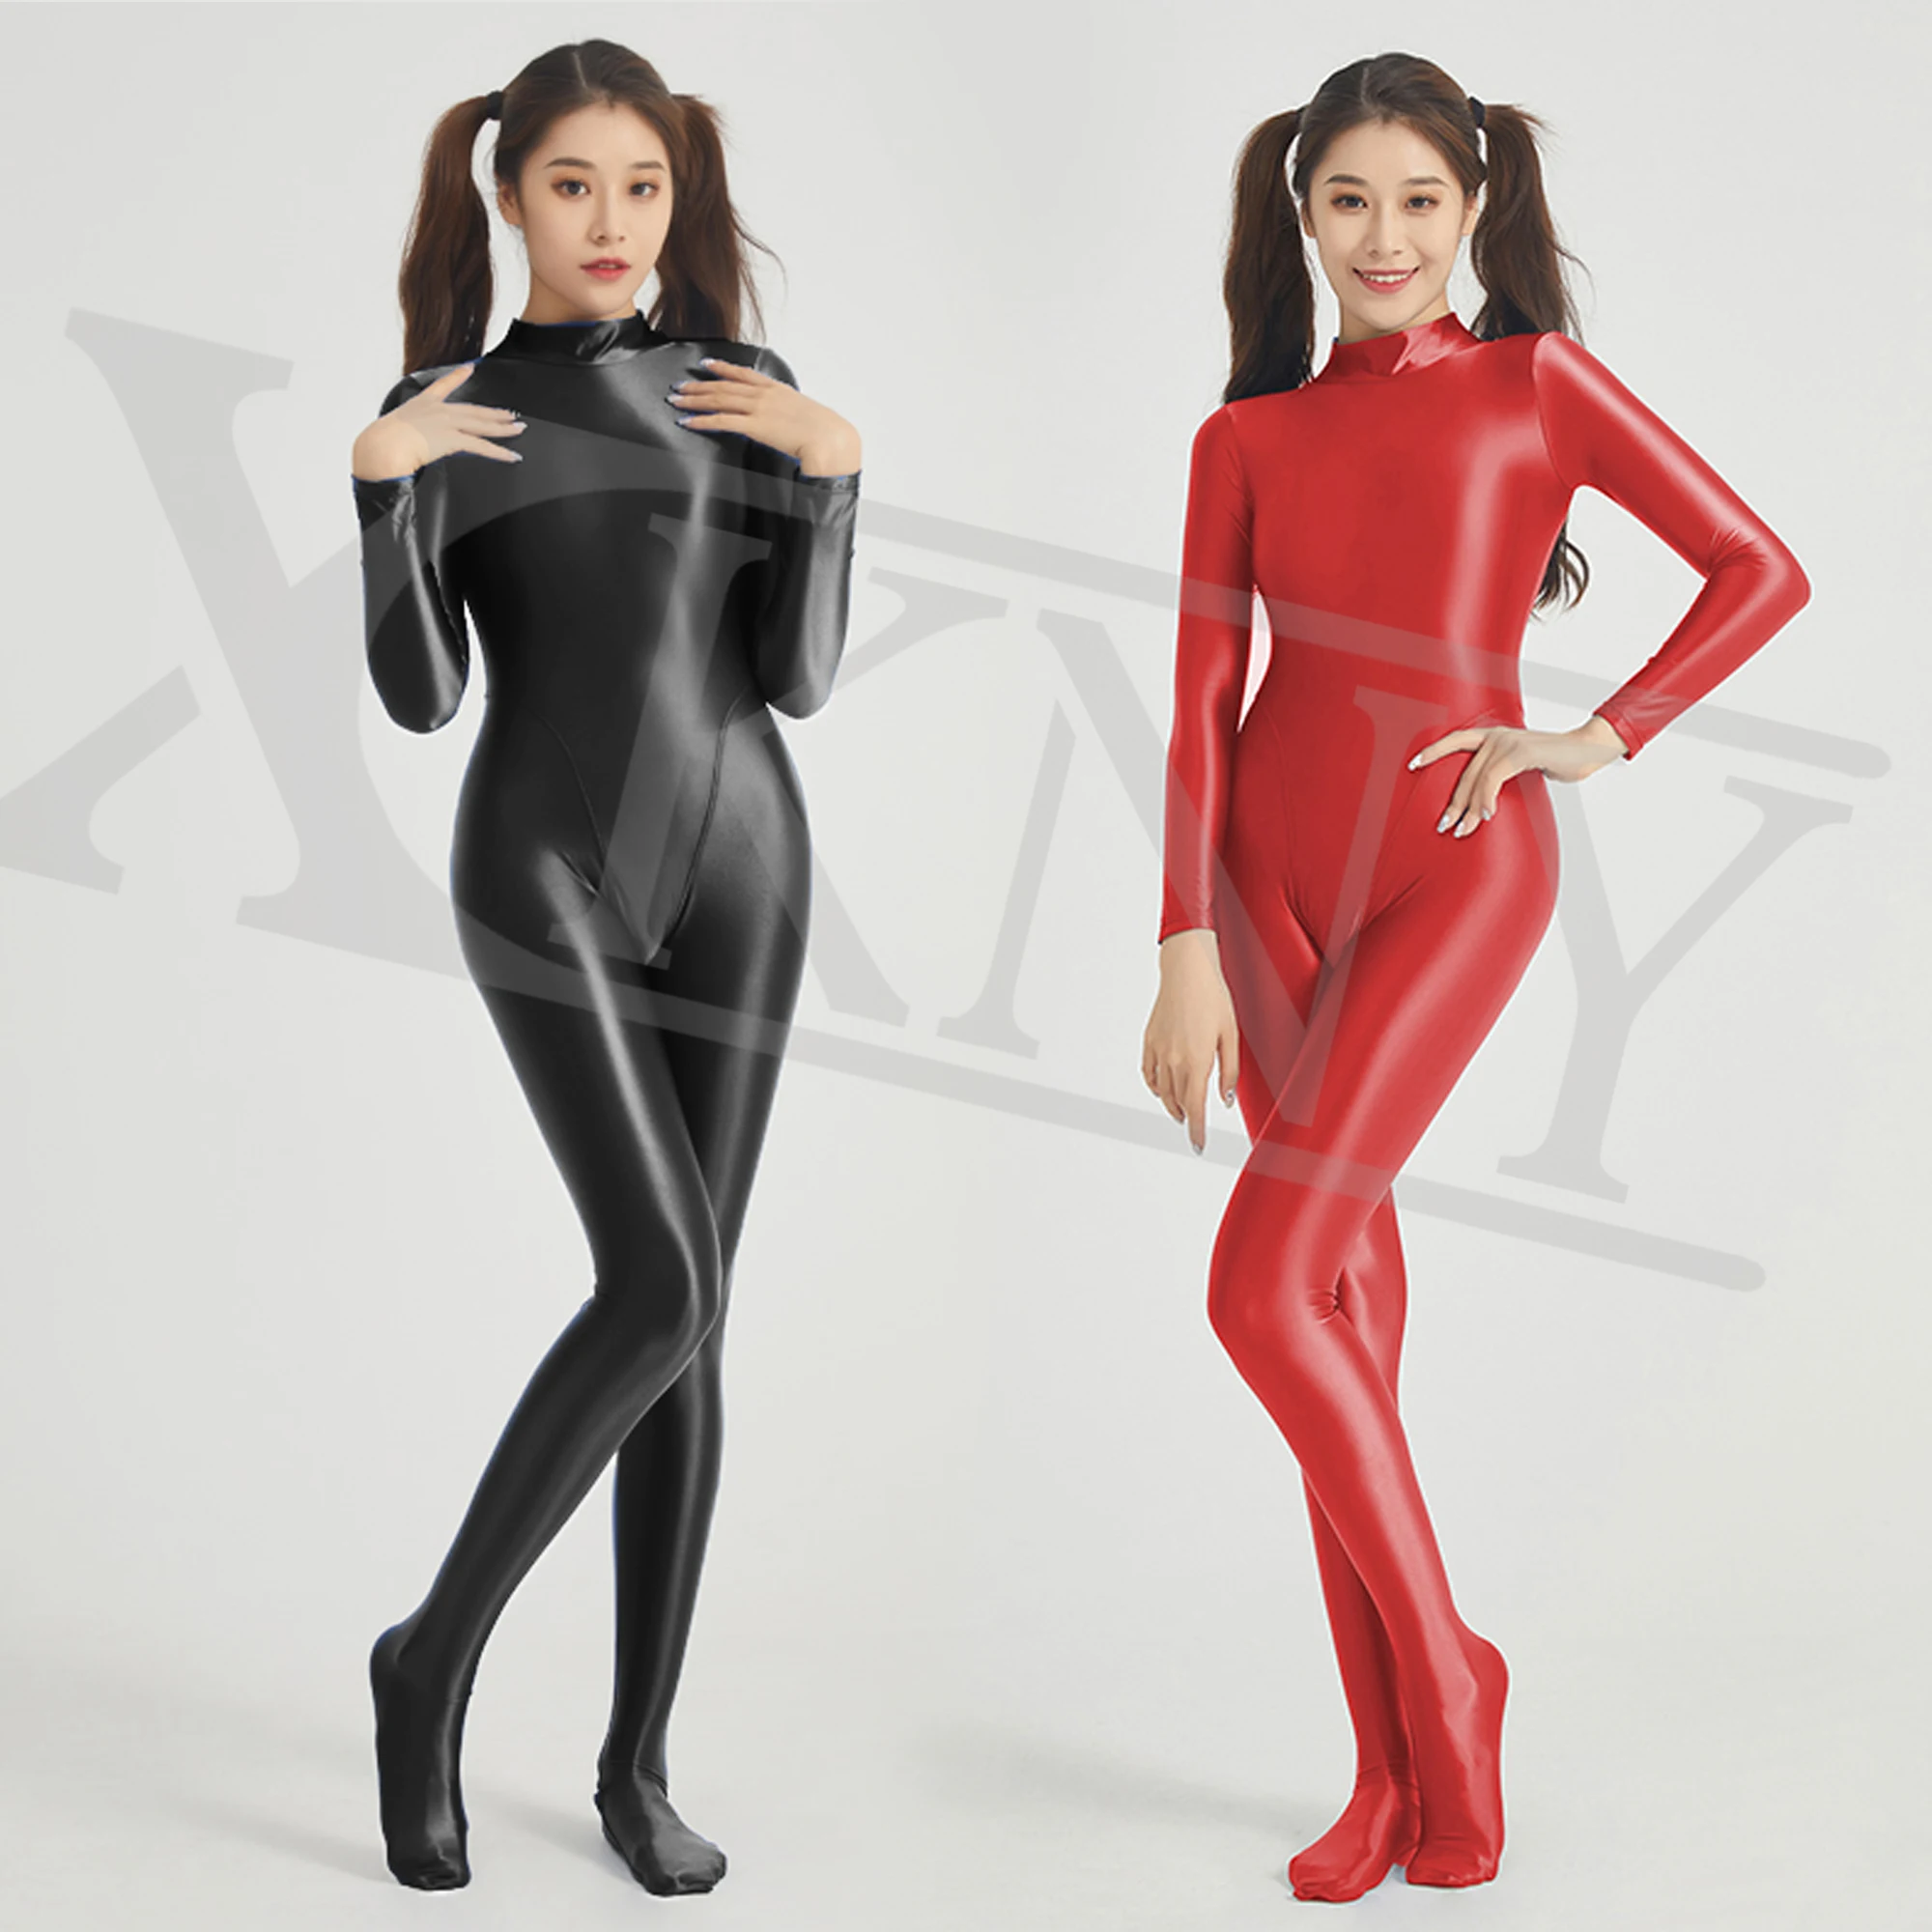 

XCKNY oil glossy One piece suit Sexy shiny long sleeve full body tights slick running Jumpsuit Yoga casual pantyhose sportswear